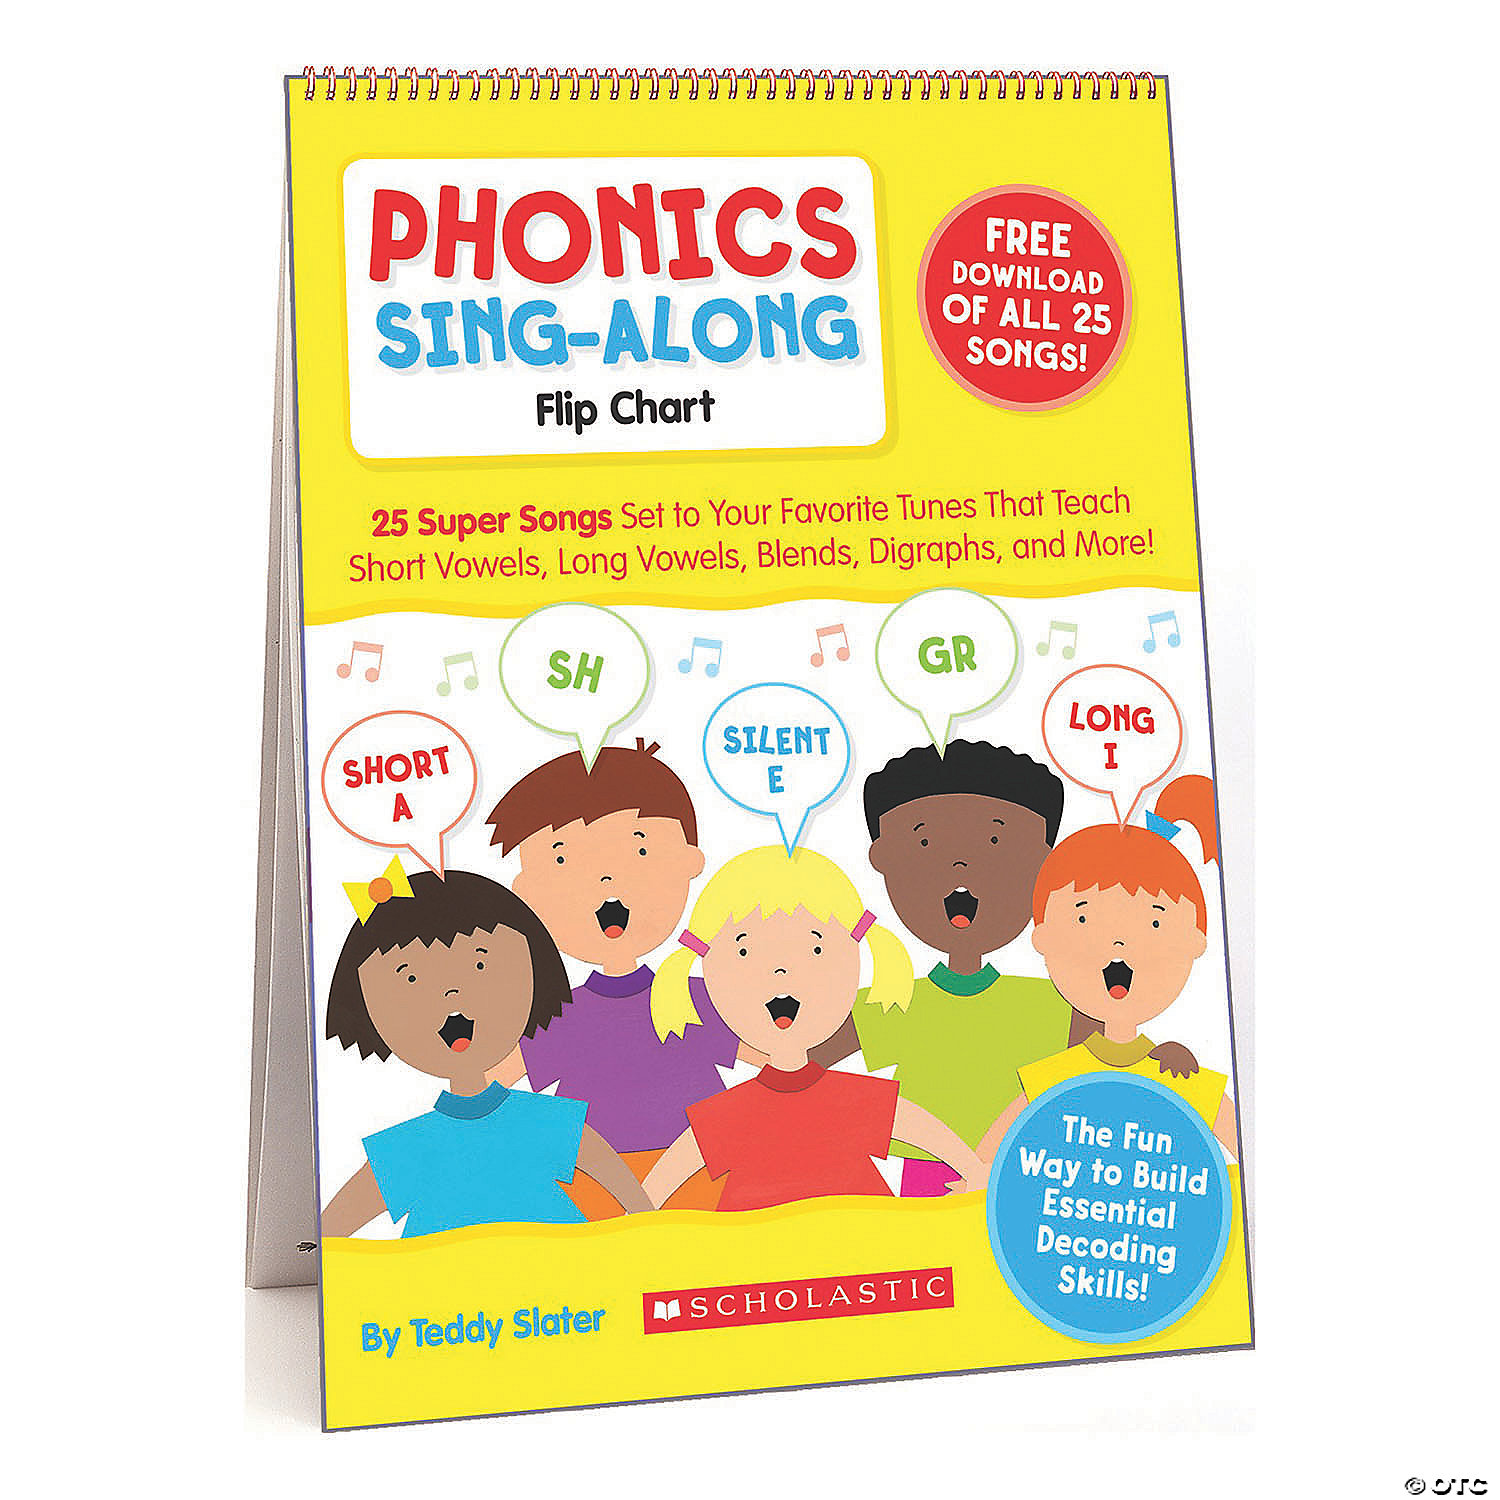 Blends,　Sing-Along　Your　Songs　Express　Long　Vowels,　Favorite　25　Short　Fun　to　Digraphs,　Flip　That　Set　More!　Chart:　and　Super　Vowels,　Tunes　Teach　Scholastic　Phonics